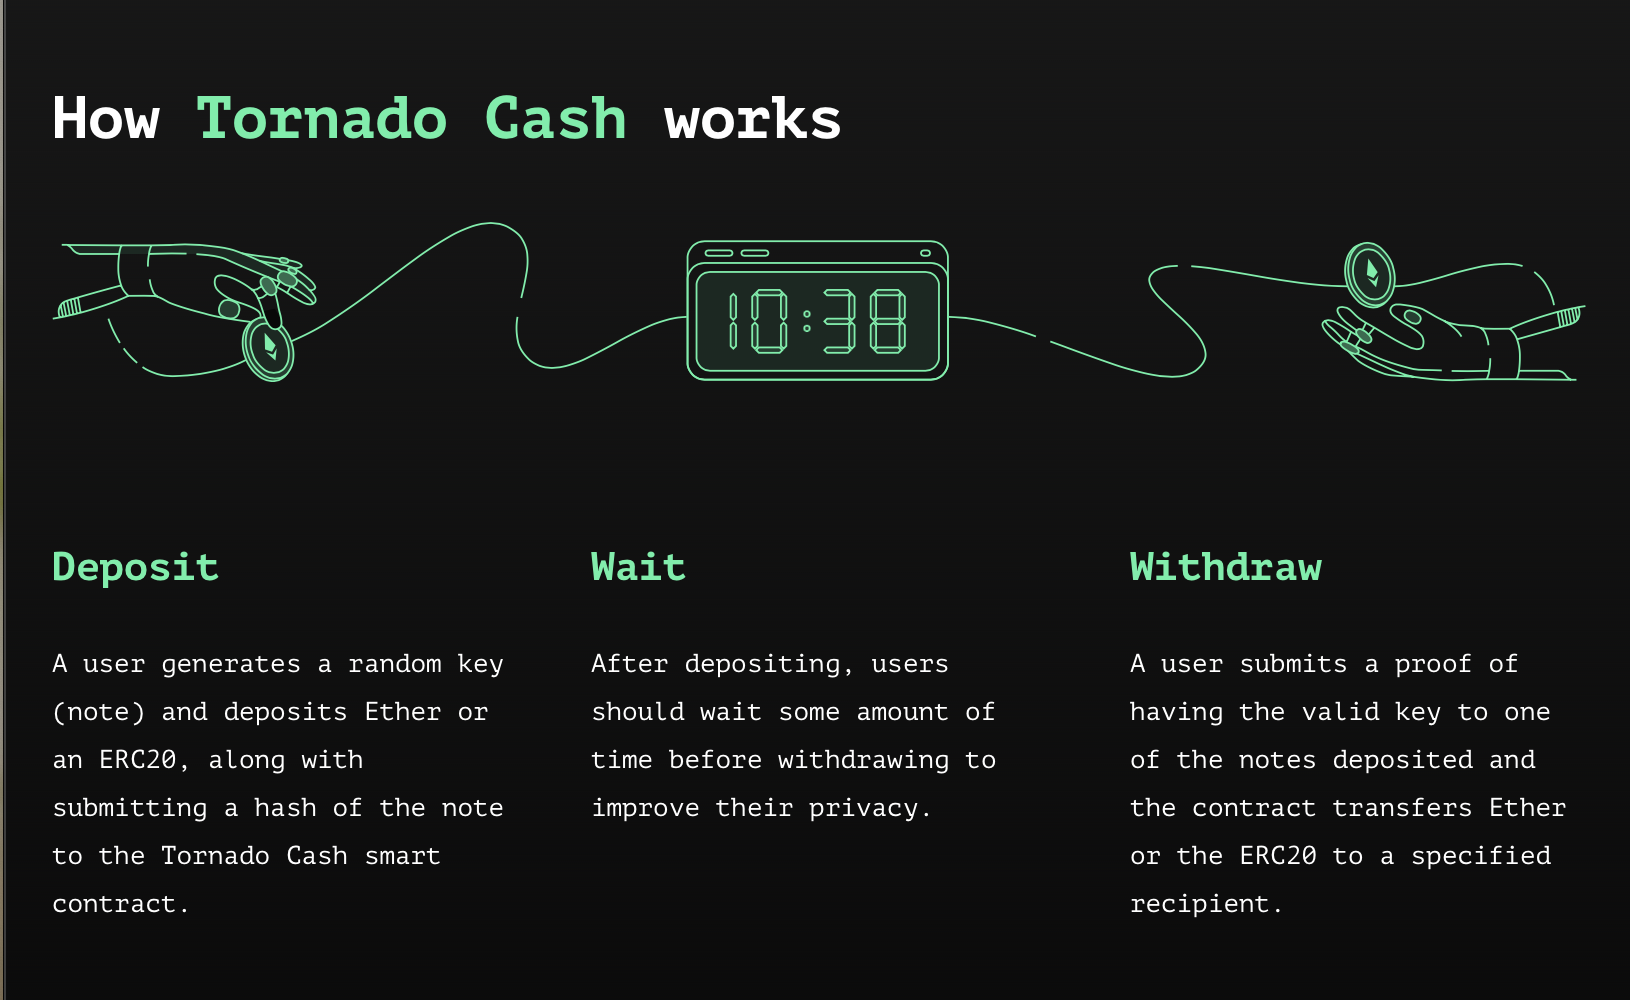 A user generates a random key (note) and deposits ether or an ERC20 along with submitting a hash of the note to the Tornado Cash smart contract. Wait: To improve their privacy, users should wait some amount of time before withdrawing. Withdraw: A user submits proof of possessing a valid key to one of the deposited notes, and the contract transfers Ether or the ERC20 to a specified recipient.